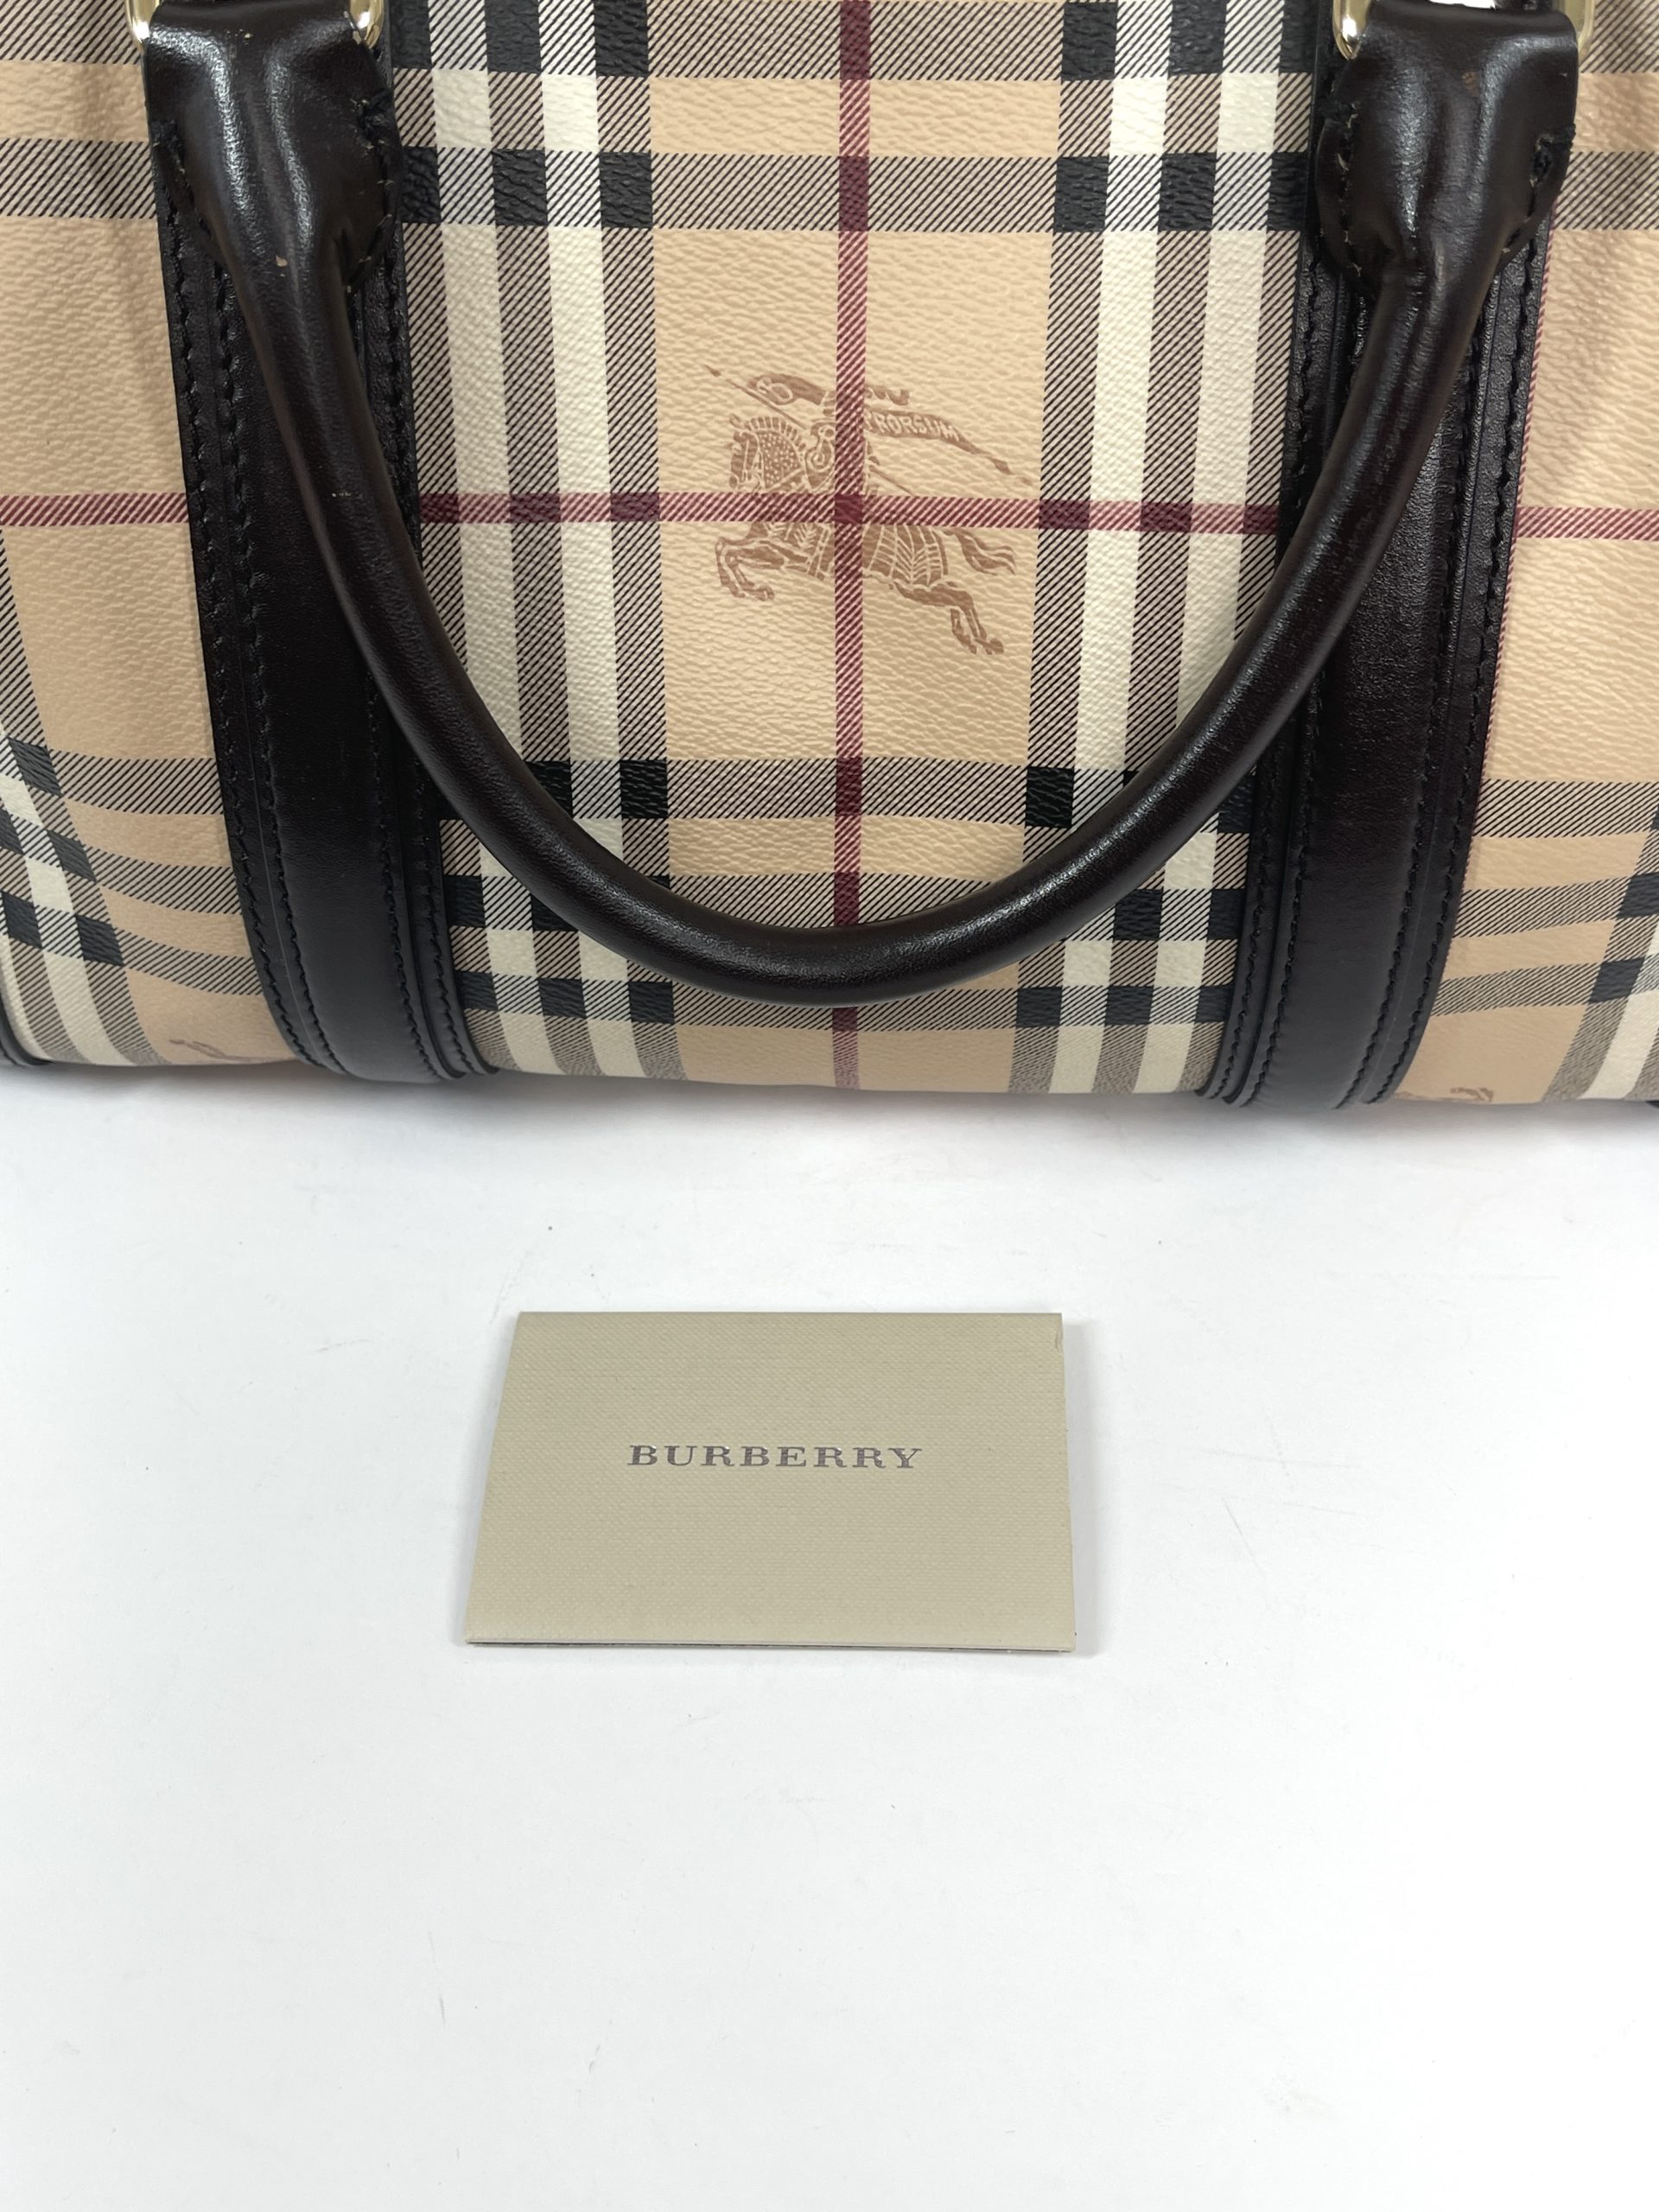 Burberry Haymarket Check Coated Canvas Medium Bowling Bag For Sale